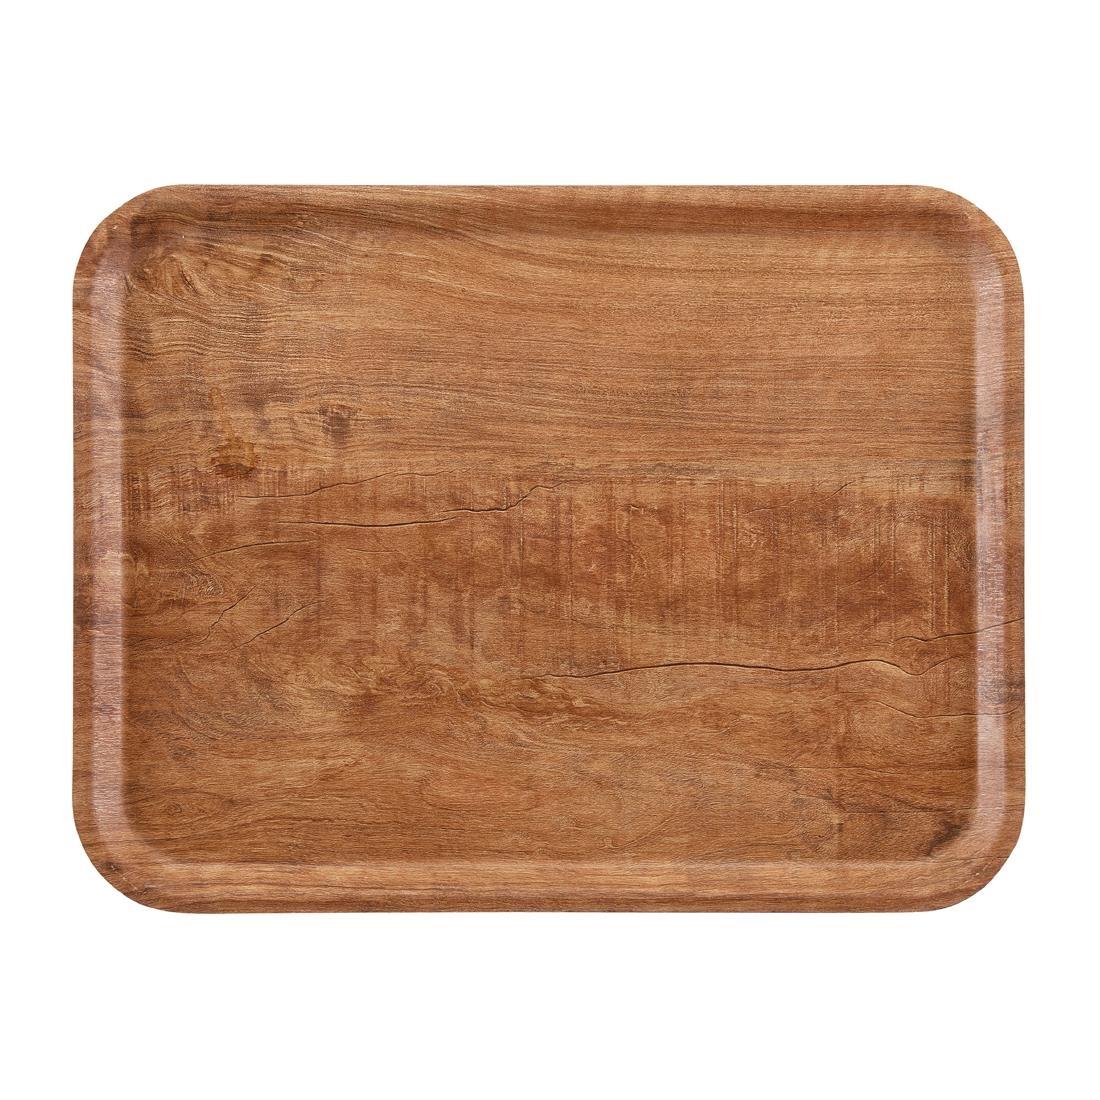 Cambro Madeira Laminate Canteen Tray Brown Olive 460mm - DR589  - 1